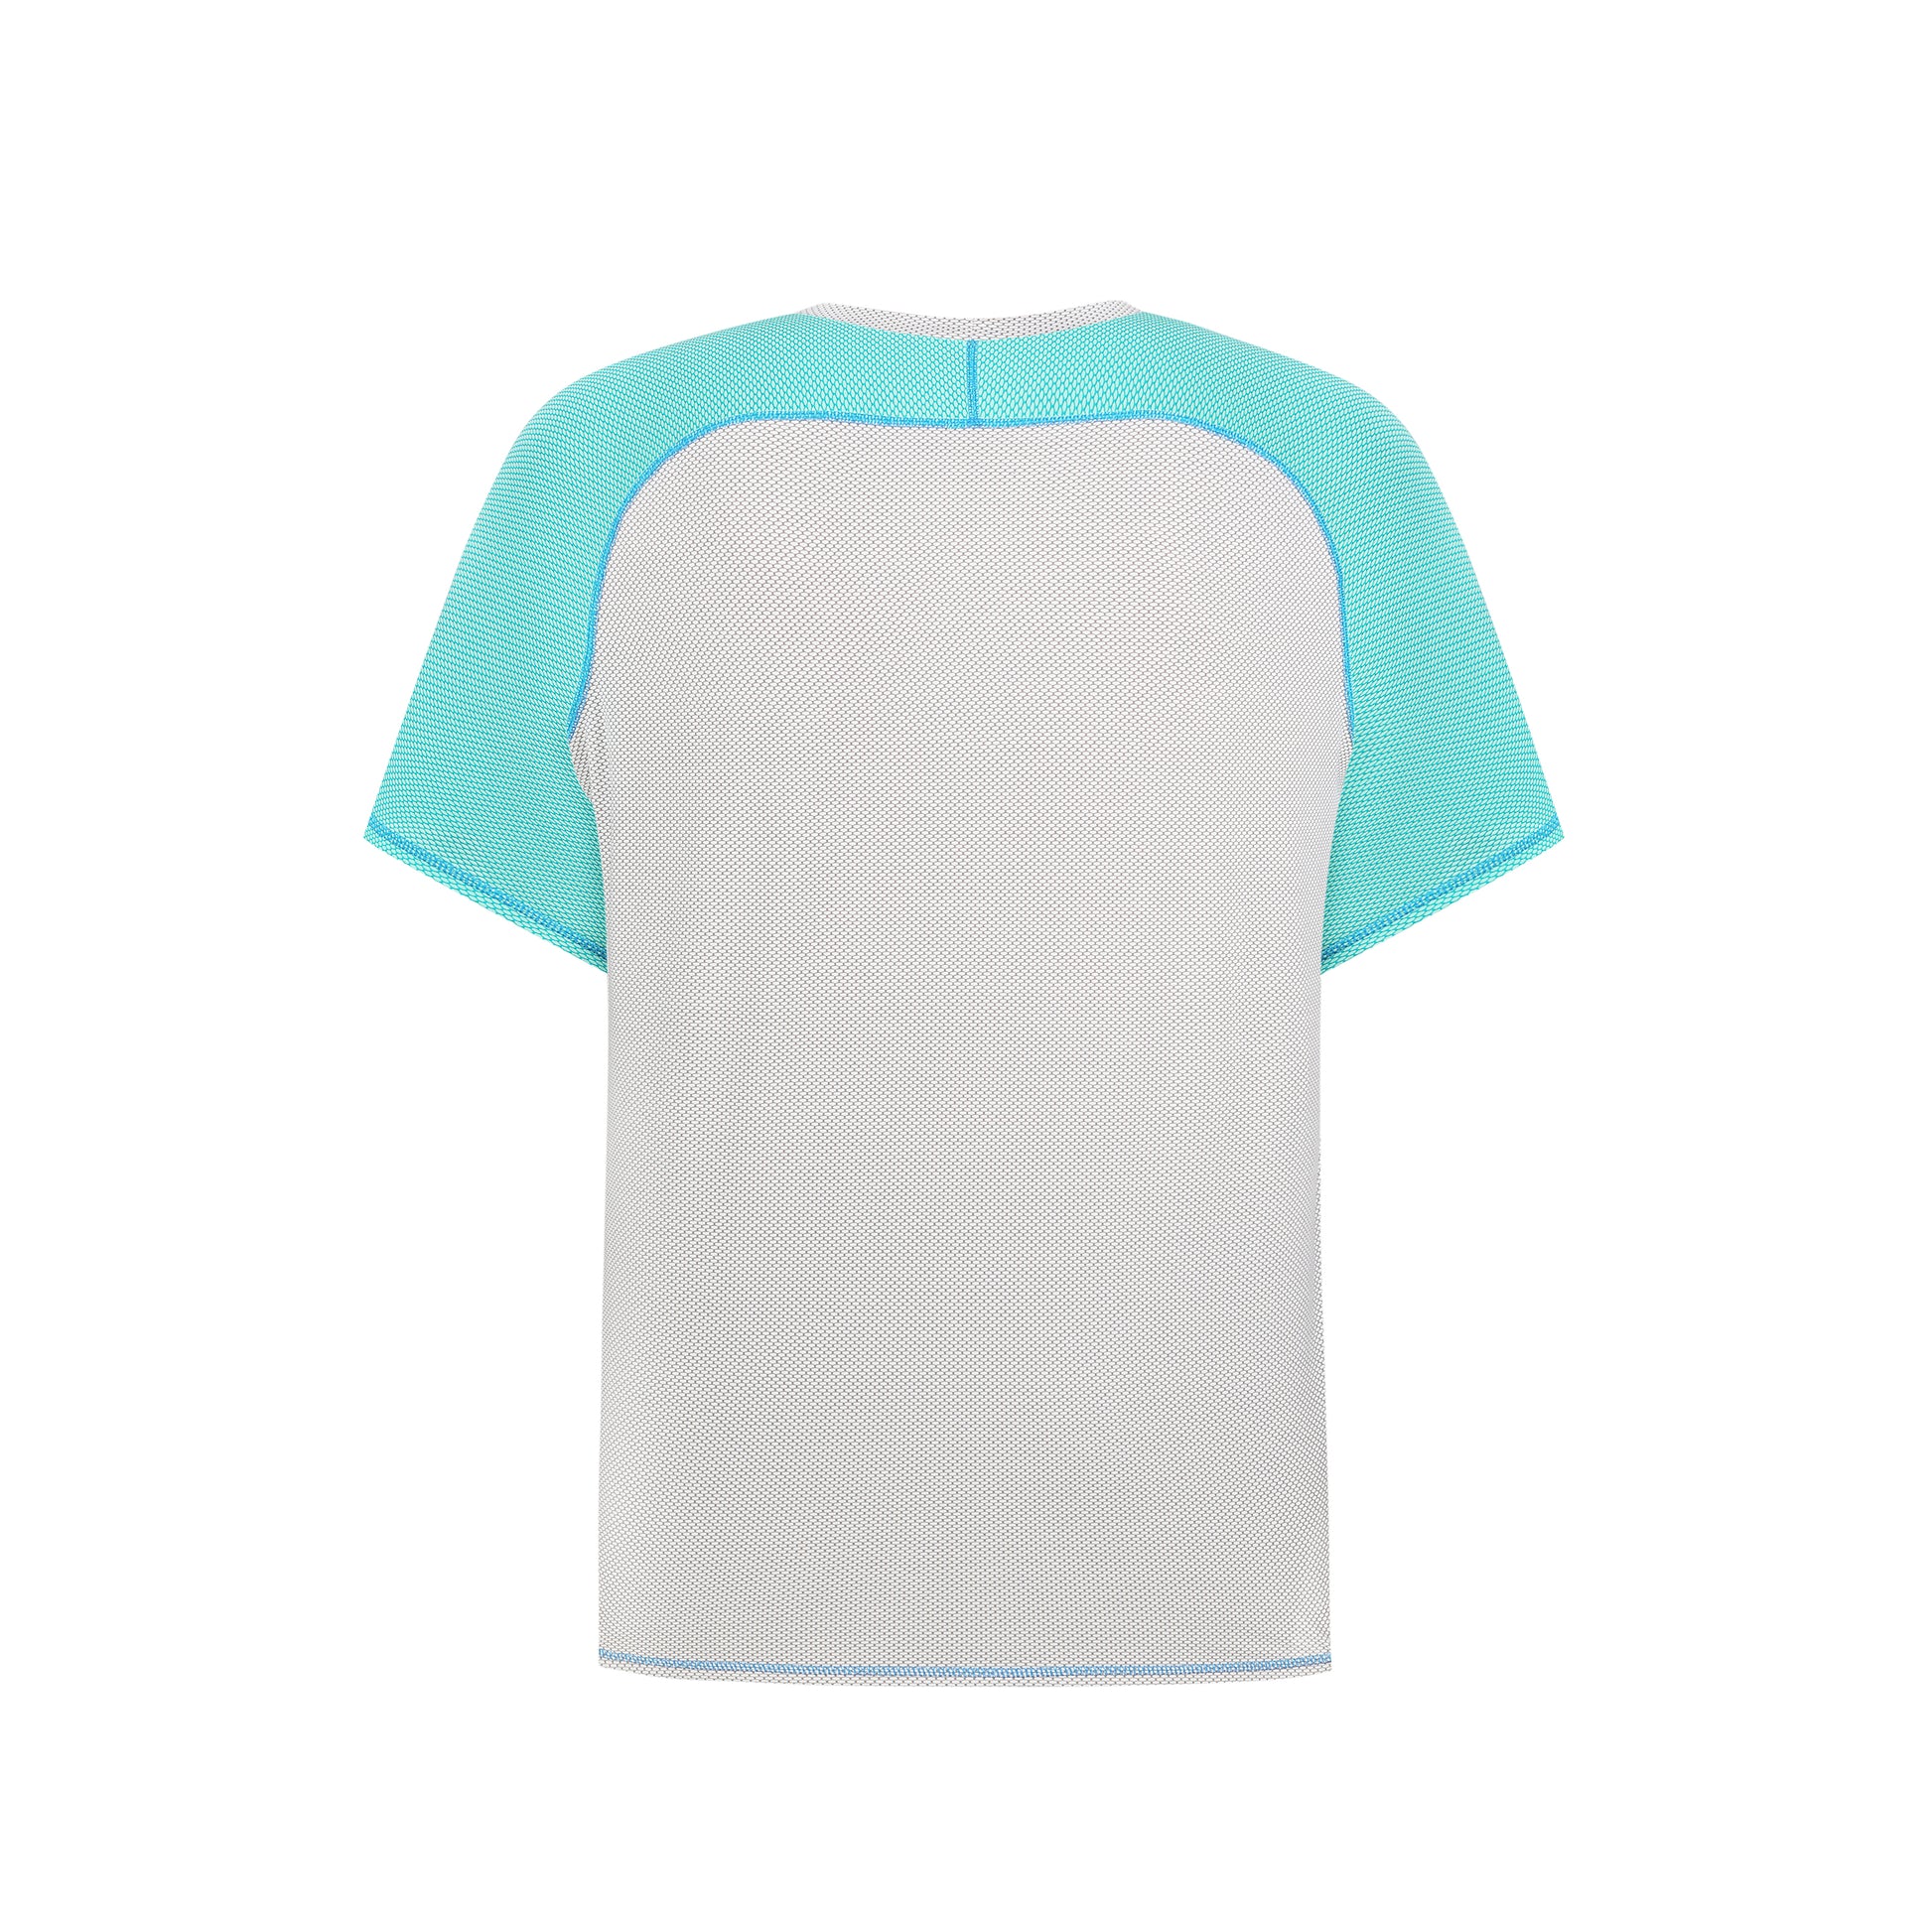 Stylish cooling t-shirt from REwind - Ukrainian clothes manufacturer brand